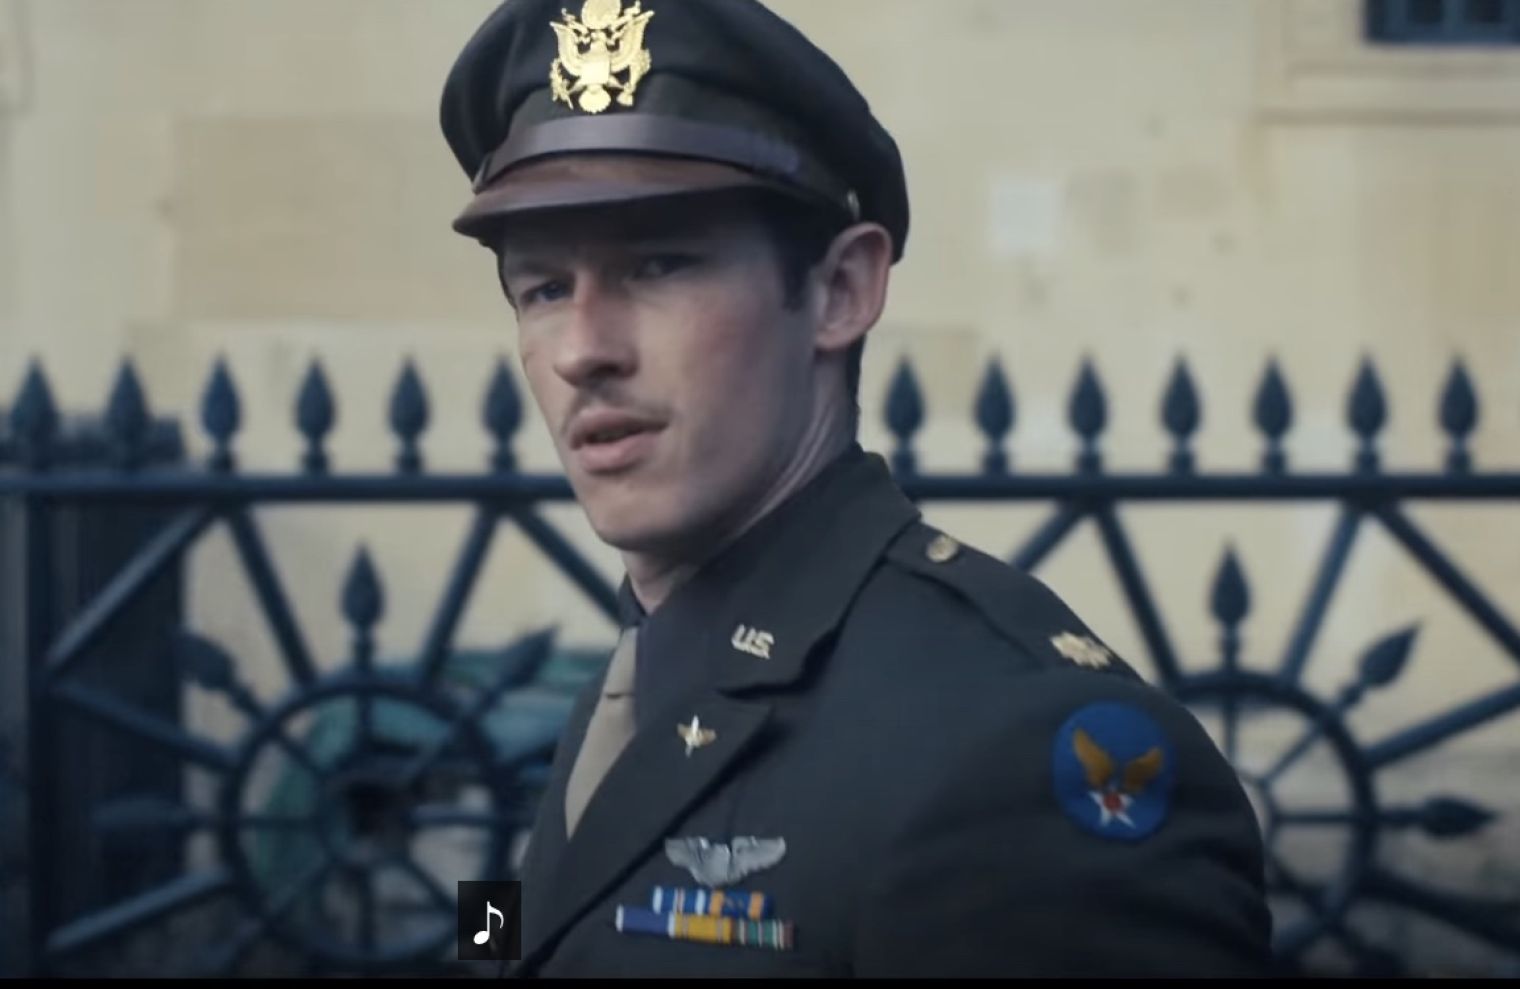 Brand new trailer for Masters of the Air, starring Callum Turner, has been released